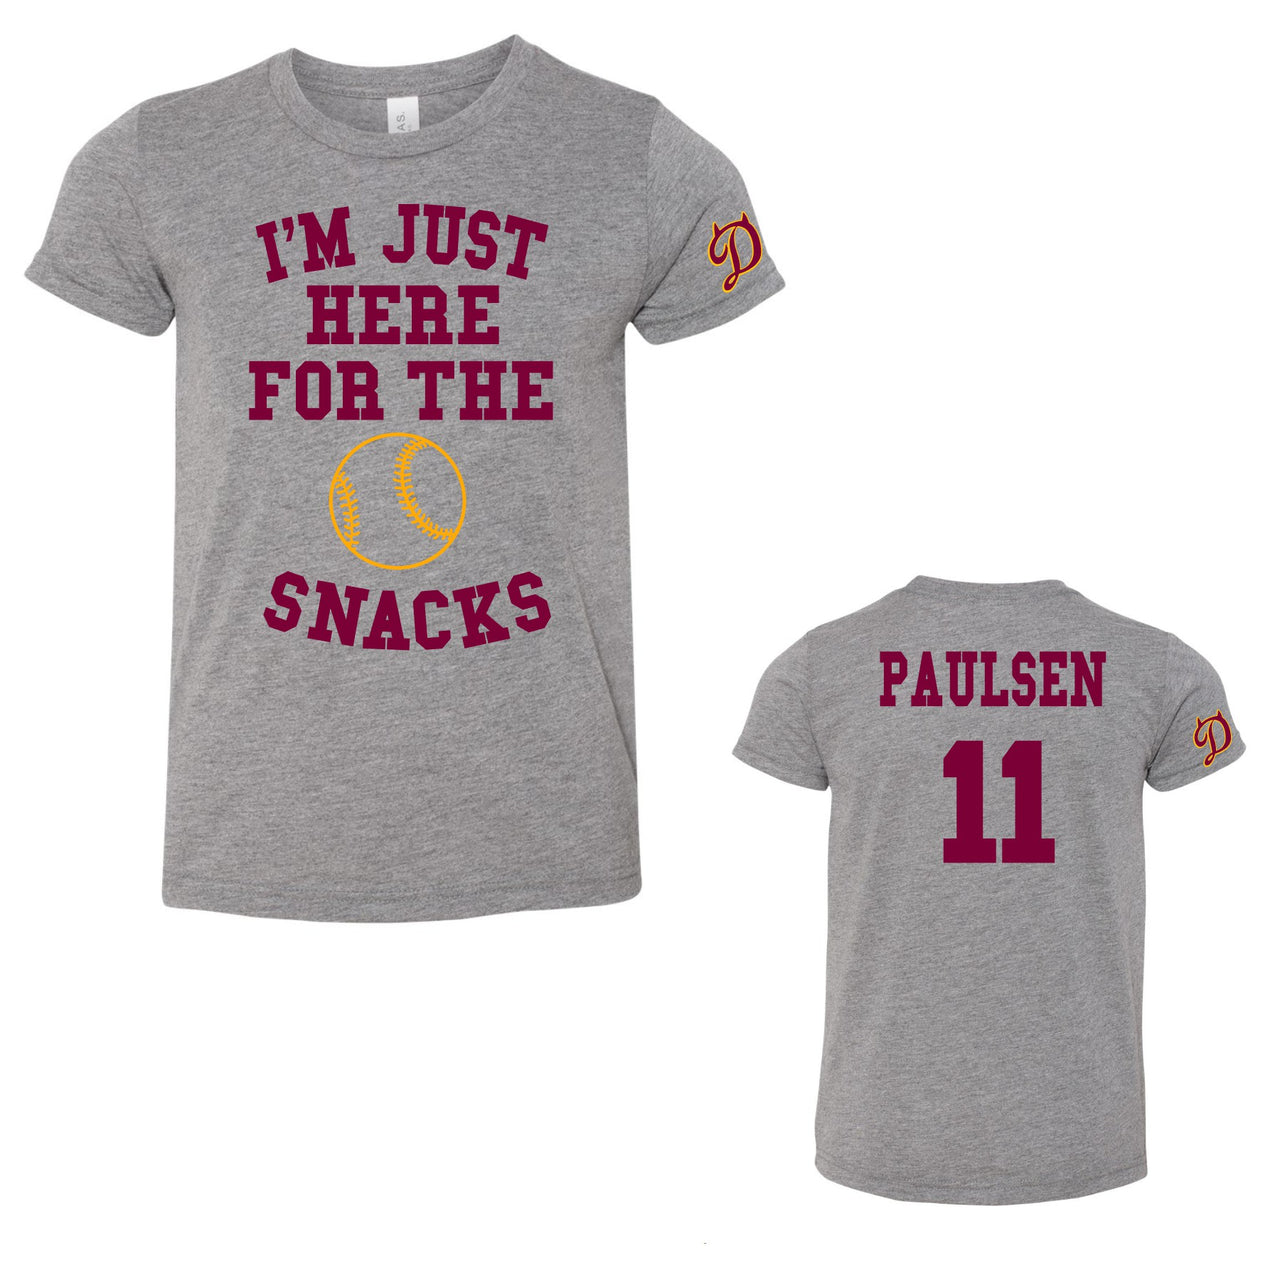 Youth/Adult - Unisex Triblend Tee - I'm Just Here for the Snacks - Diablas